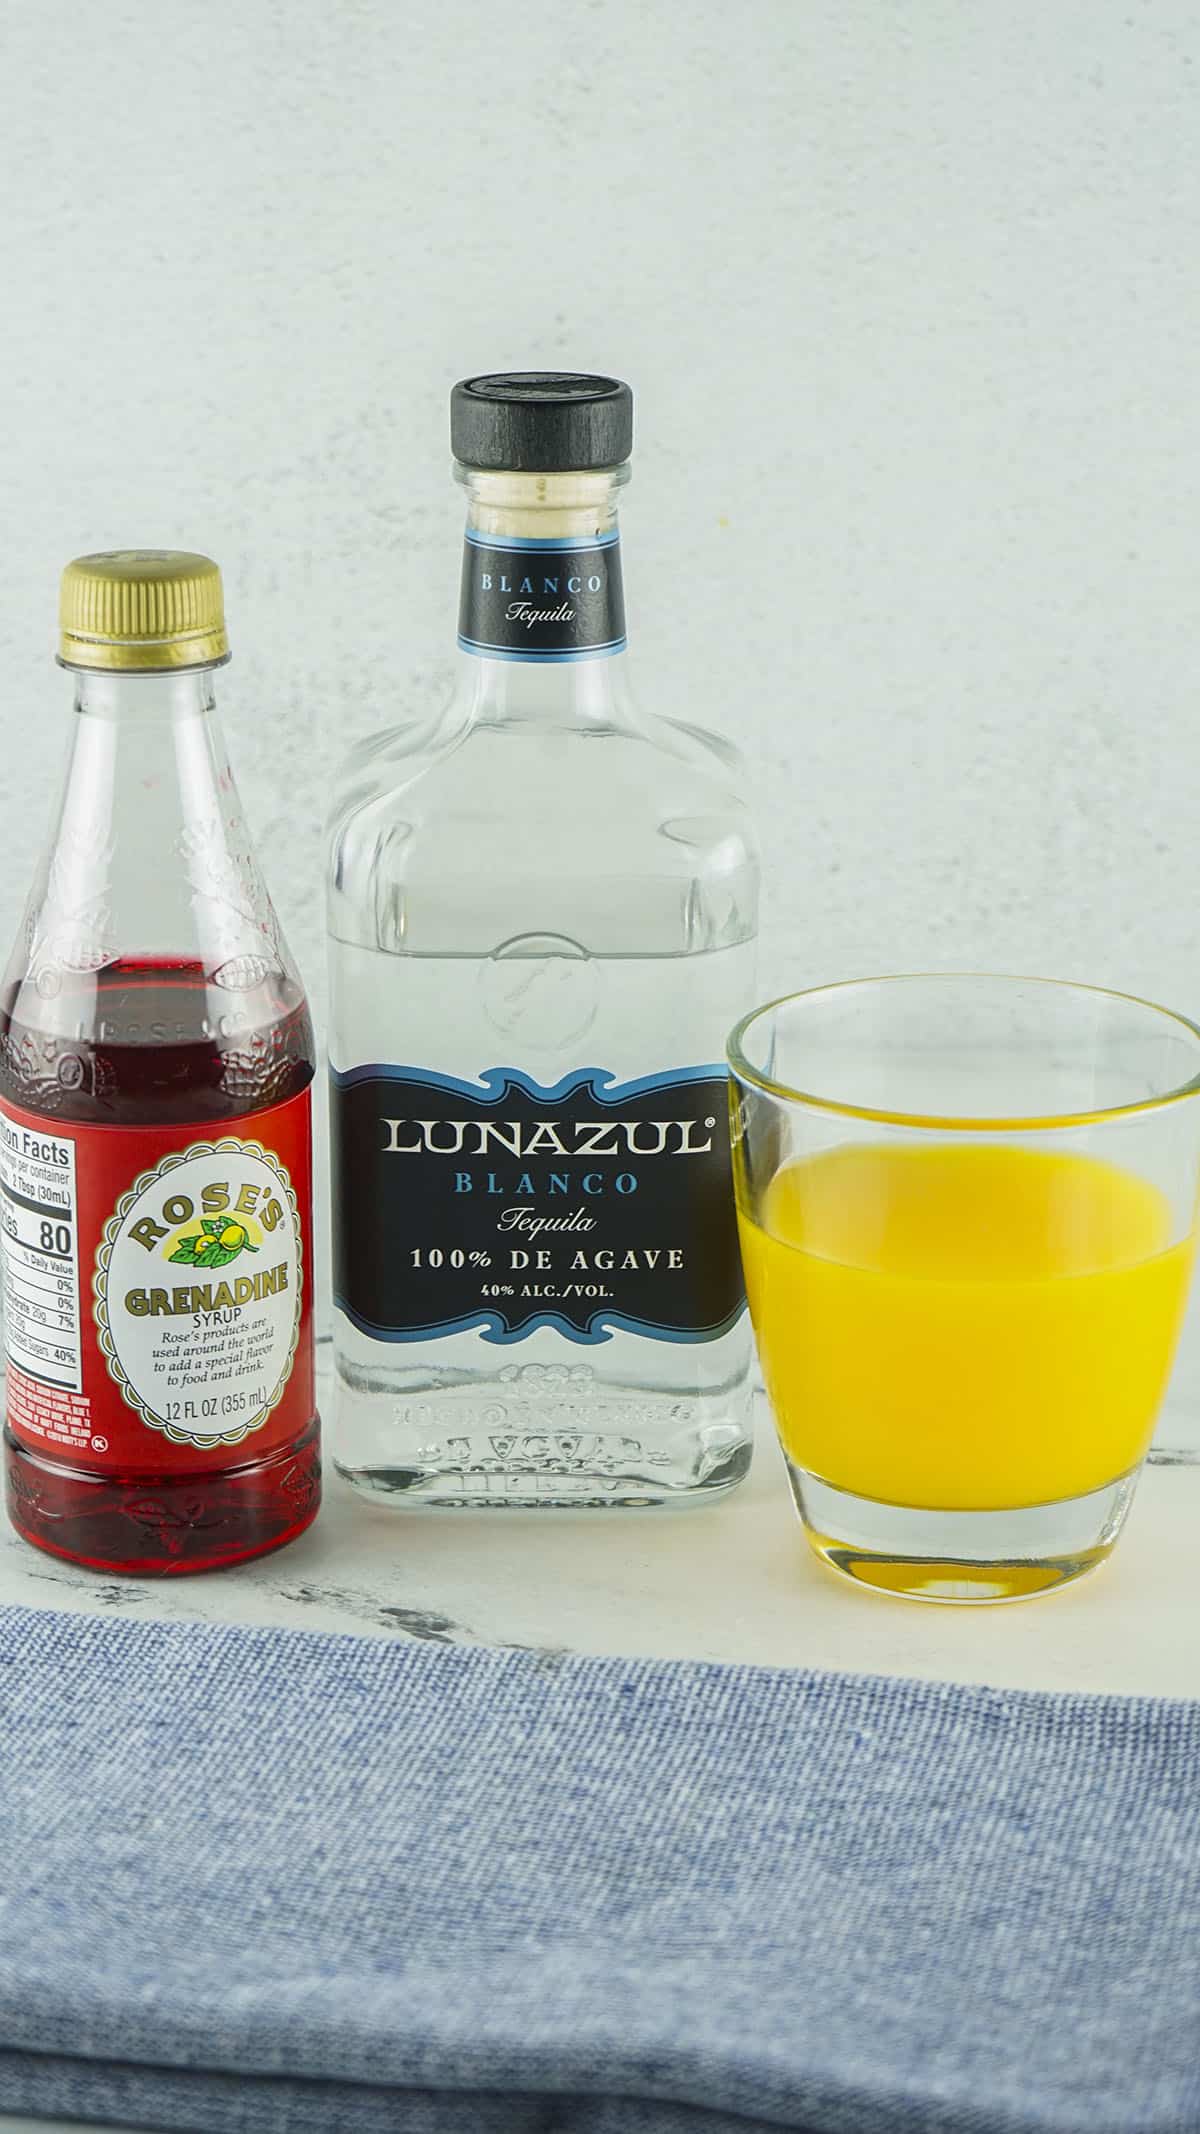 The ingredients needed to make the cocktail. Grenadine syrup is featured left, then tequila and orange juice.